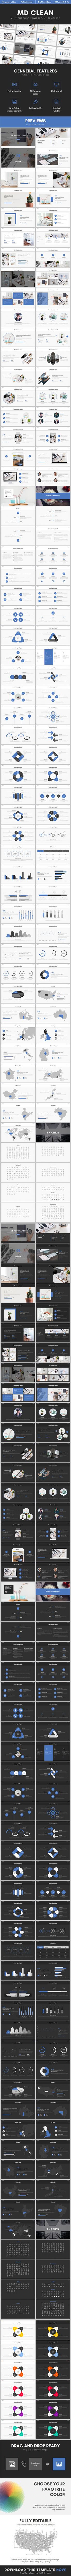 MD Clean Multipurpose PowerPoint Template